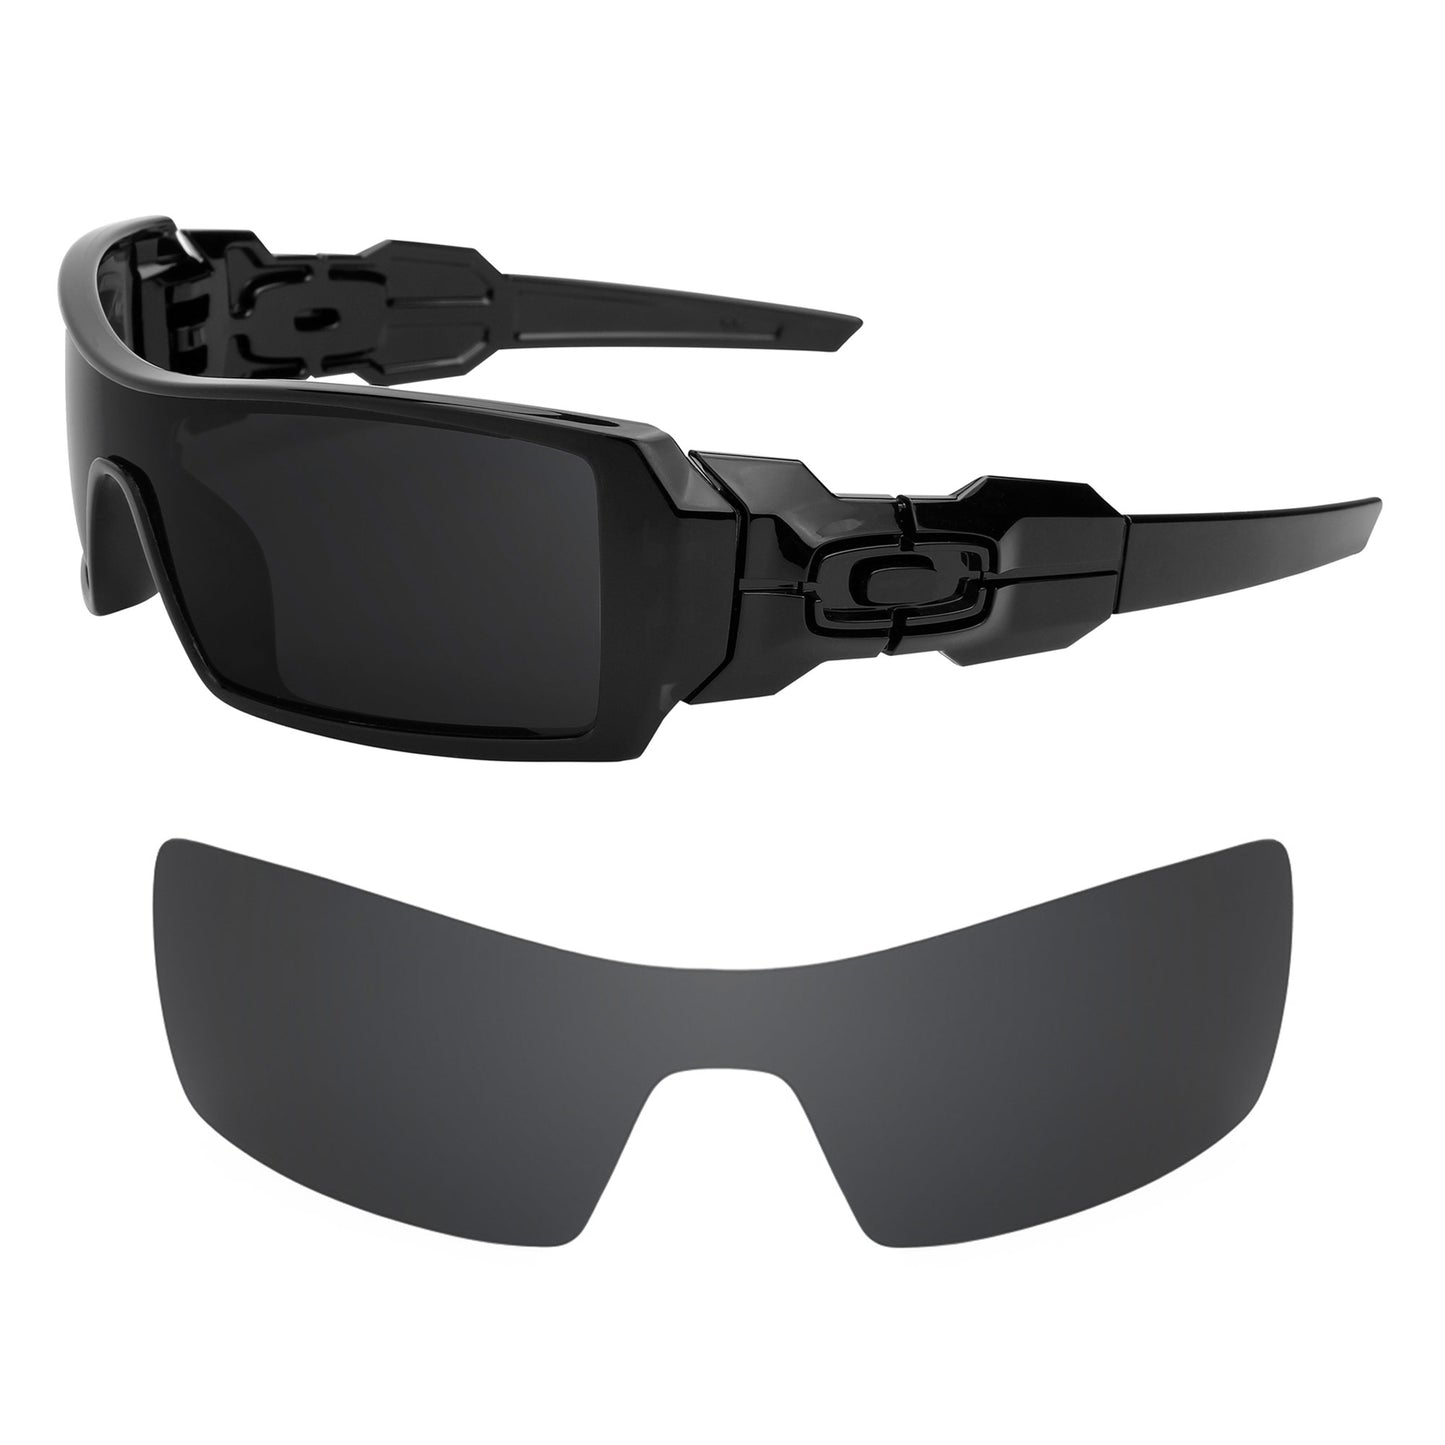 Oakley Oil Rig sunglasses with replacement lenses